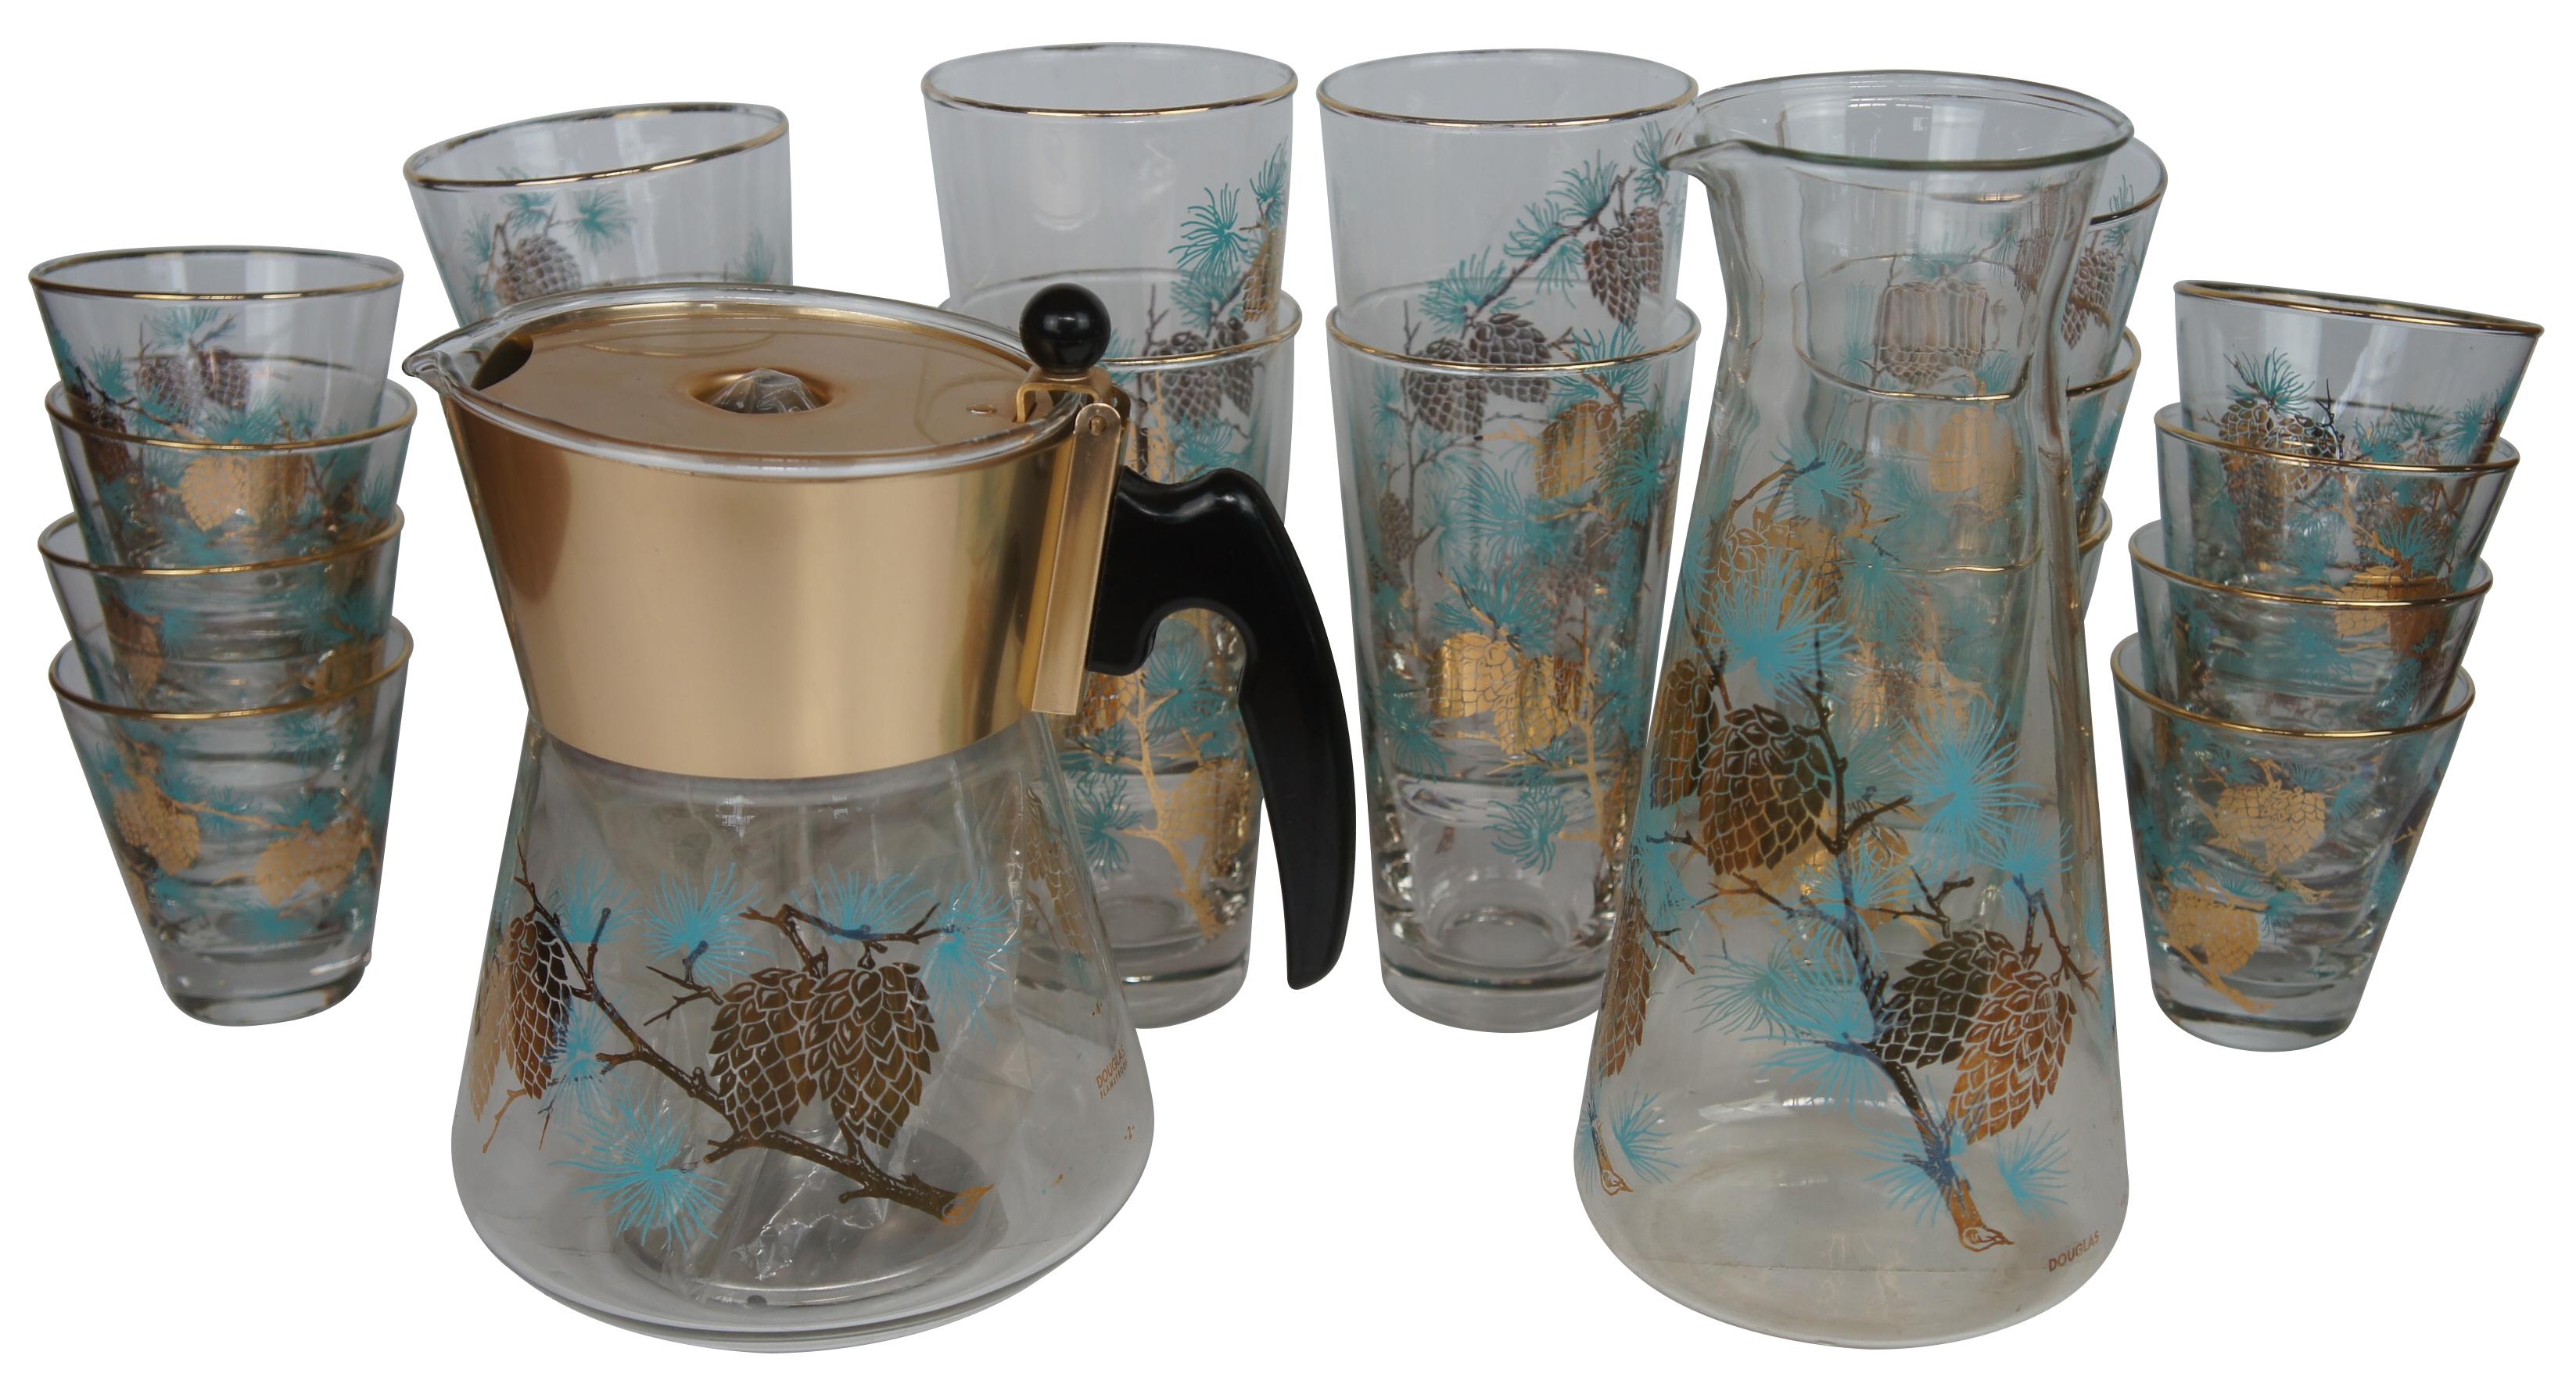 Mid century Libbey glass barware set by David Douglas featuring glasses in assorted sizes with a tea / coffee pot or percolator and pitcher decorated with aqua and gold pine cone and needle design.

pot- 7